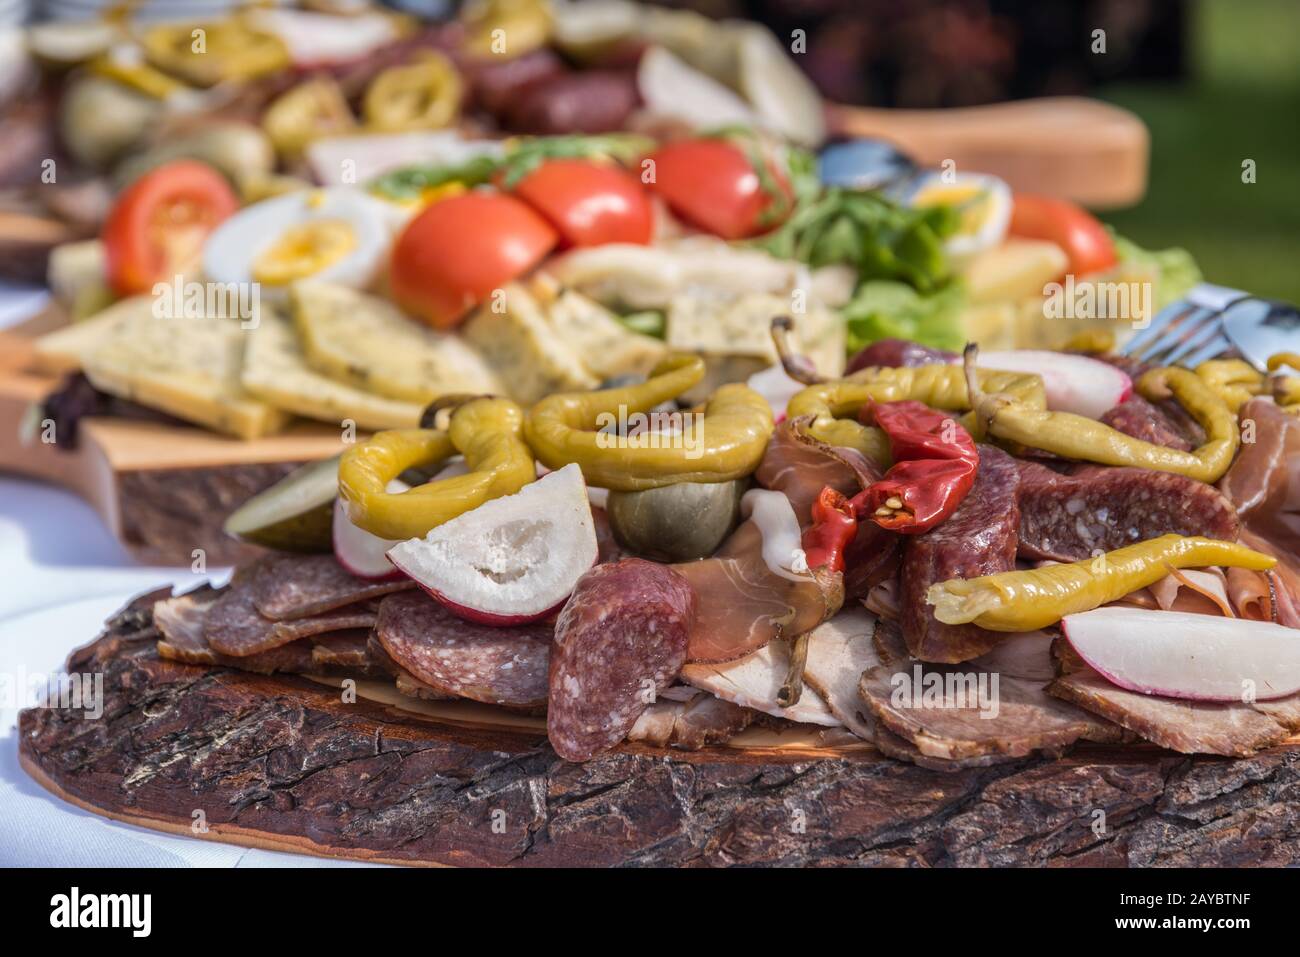 Varied food - rustic cold plate - buffet Stock Photo